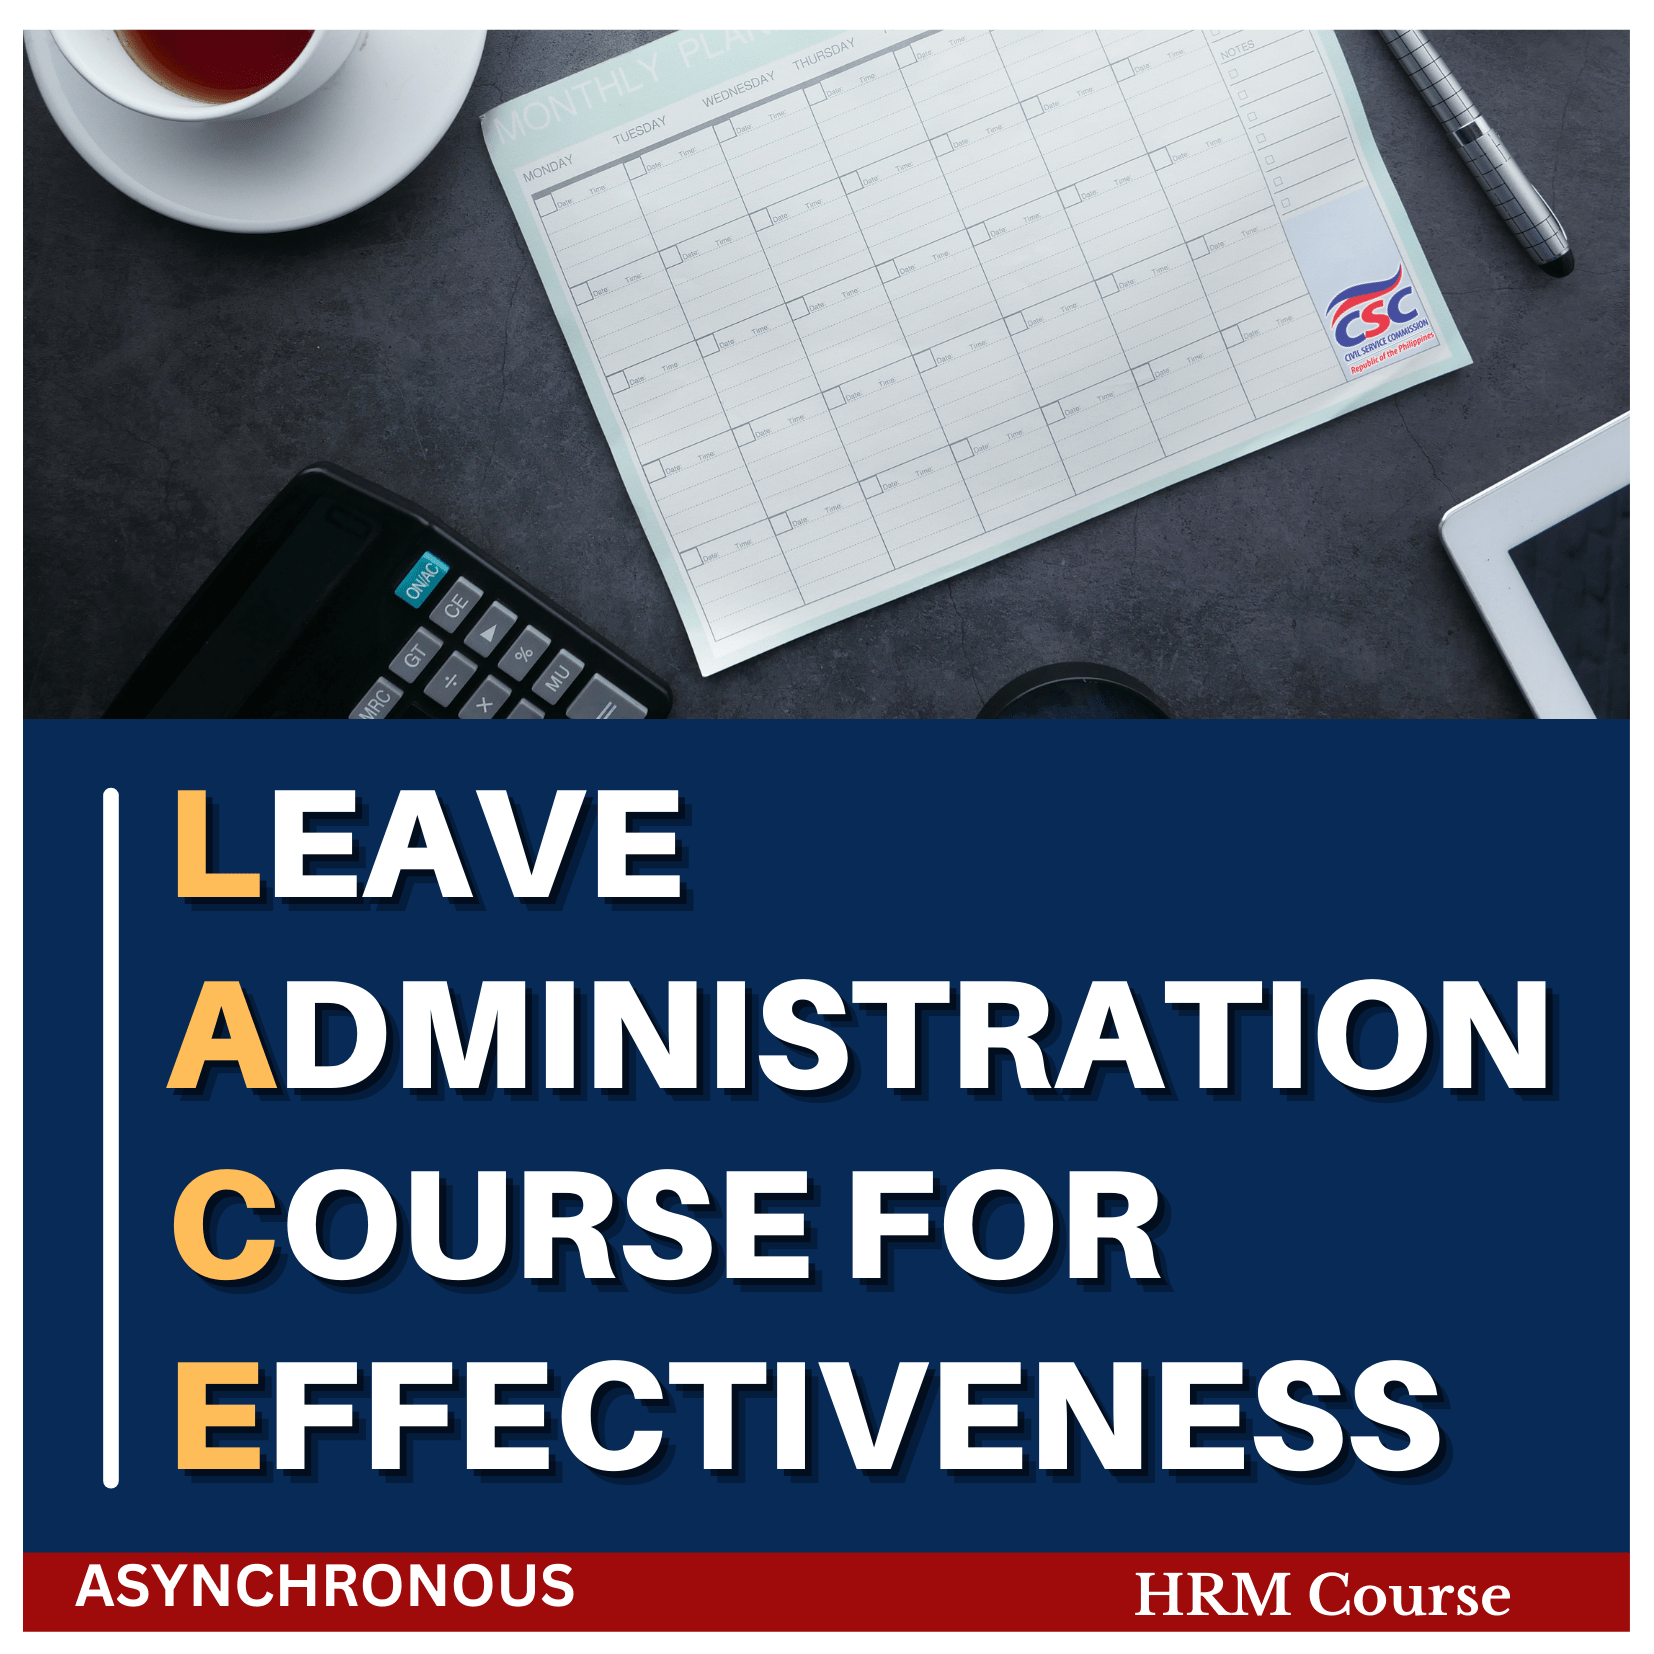 Online Course on Leave Administration Course for Effectiveness